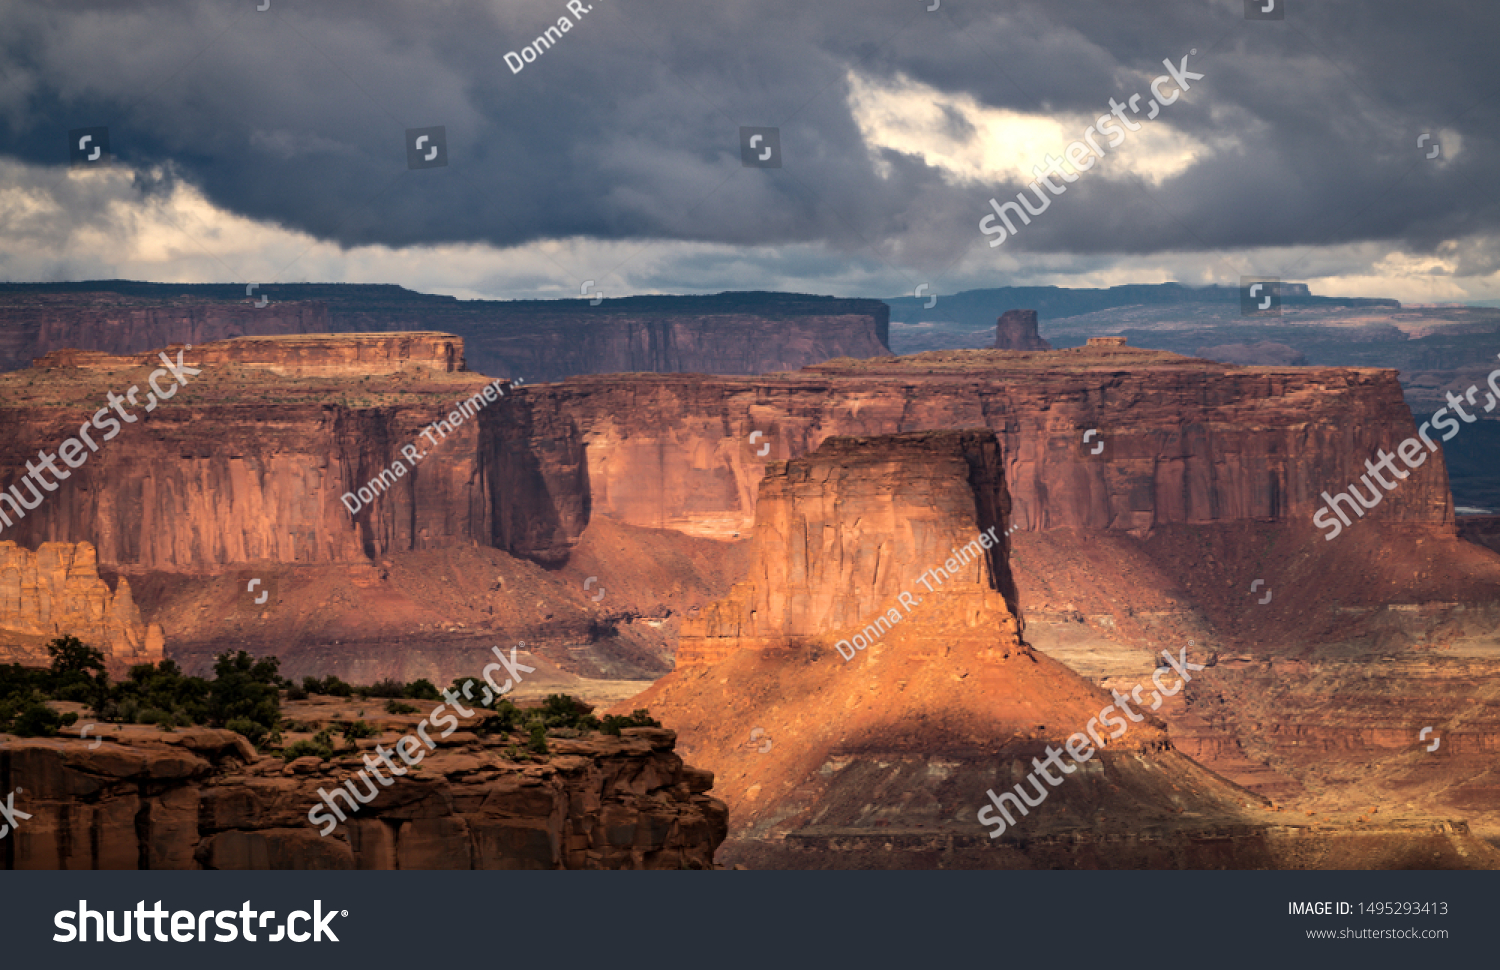 Beautiful sunlight peeking out from storm clouds. The red rock formations come alive as the sunlight hits their surface. The scene creates a sense of awe and wonder. #1495293413